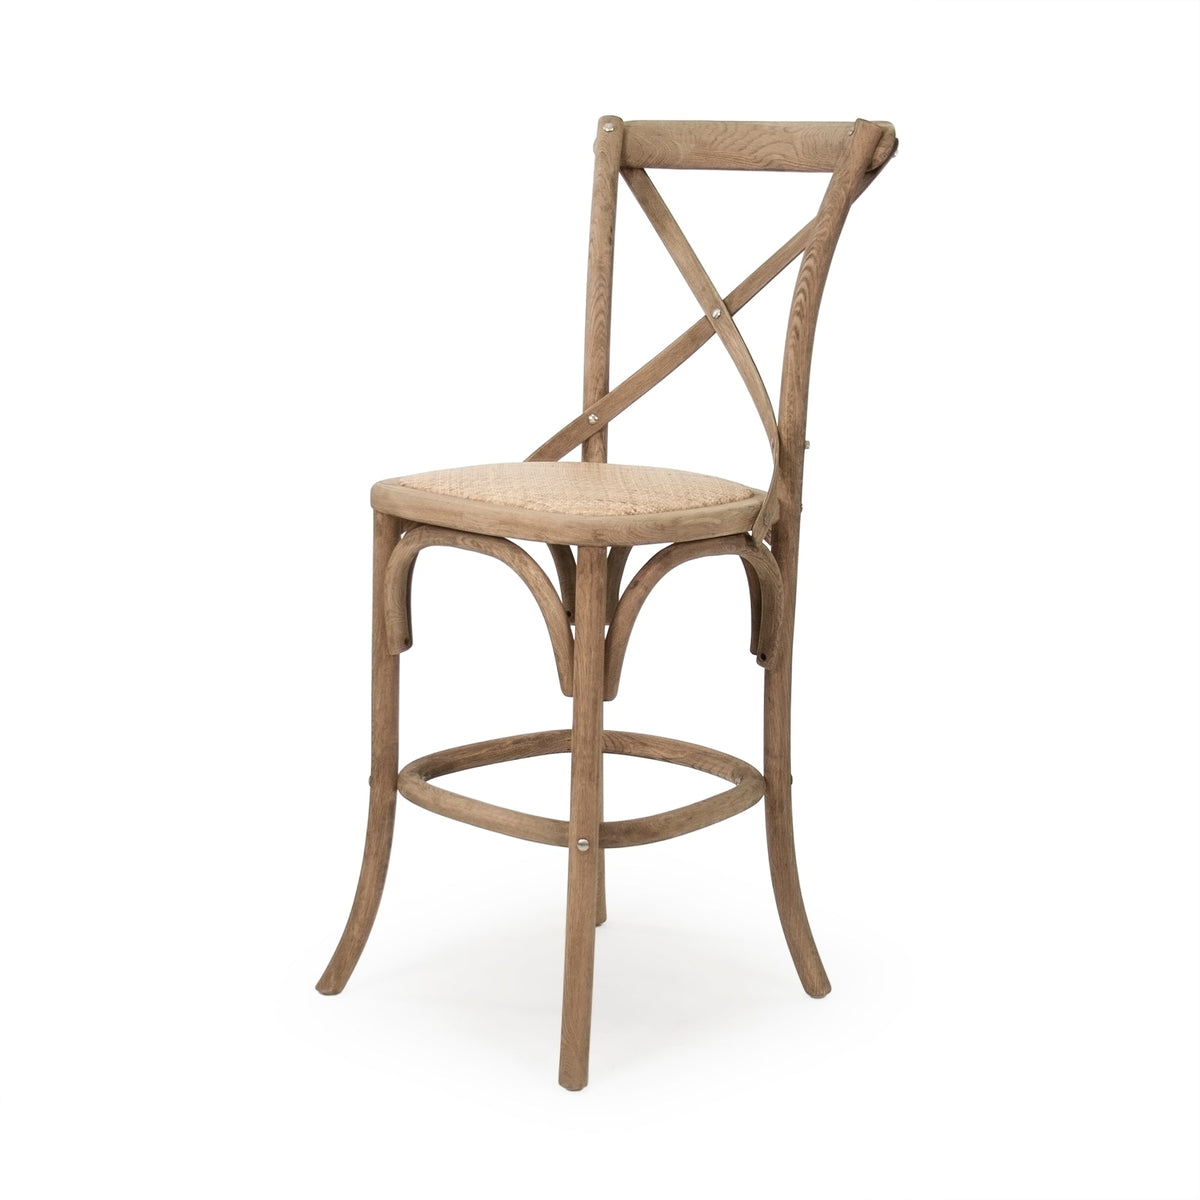 Parisienne Cafe Counter Stool by Zentique